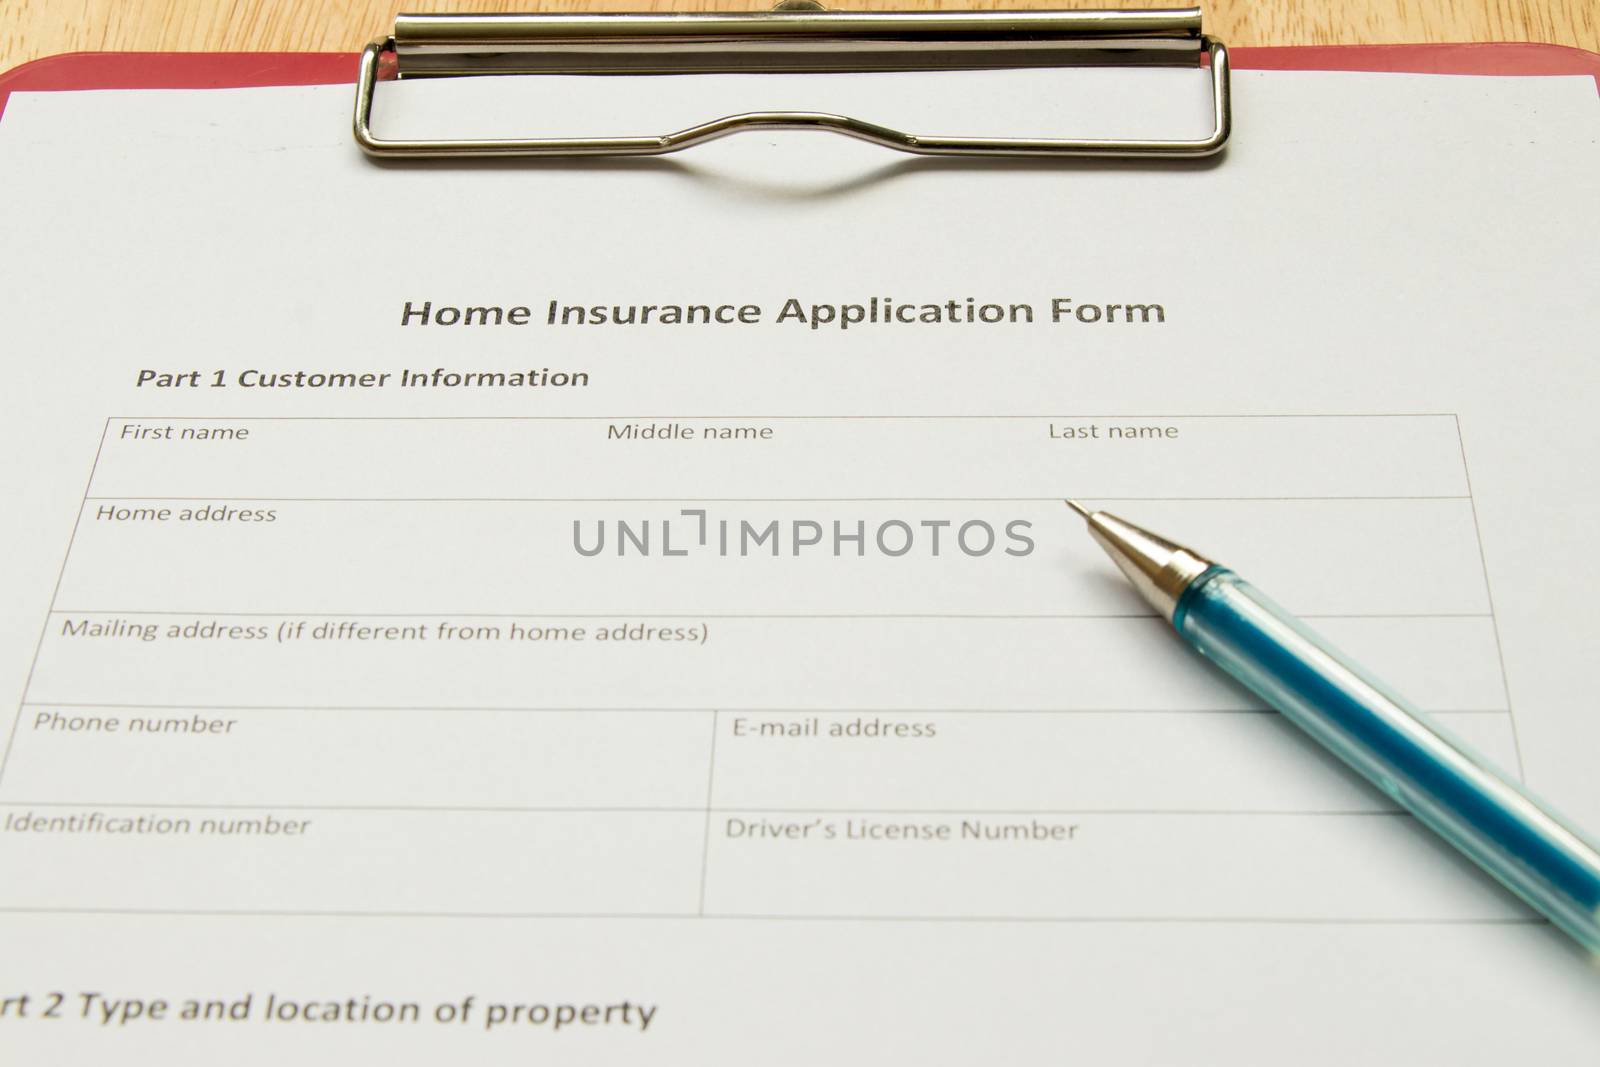 Home insurance application form with red file on wooden table by Hengpattanapong